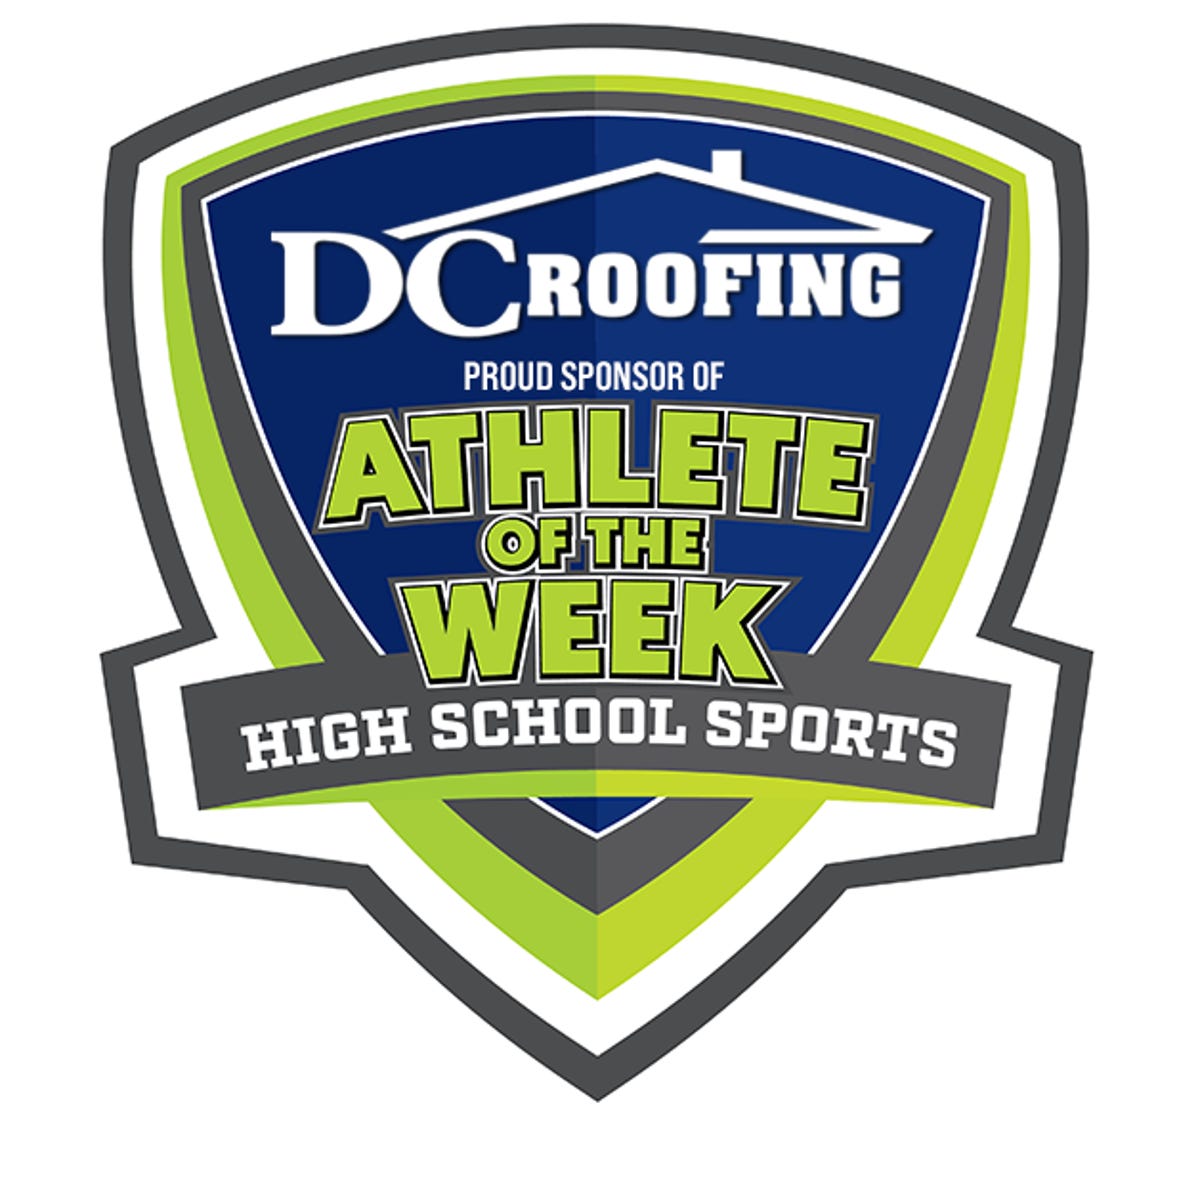 Vote for the DC Roofing 321preps Athlete of the Week, April 22-27